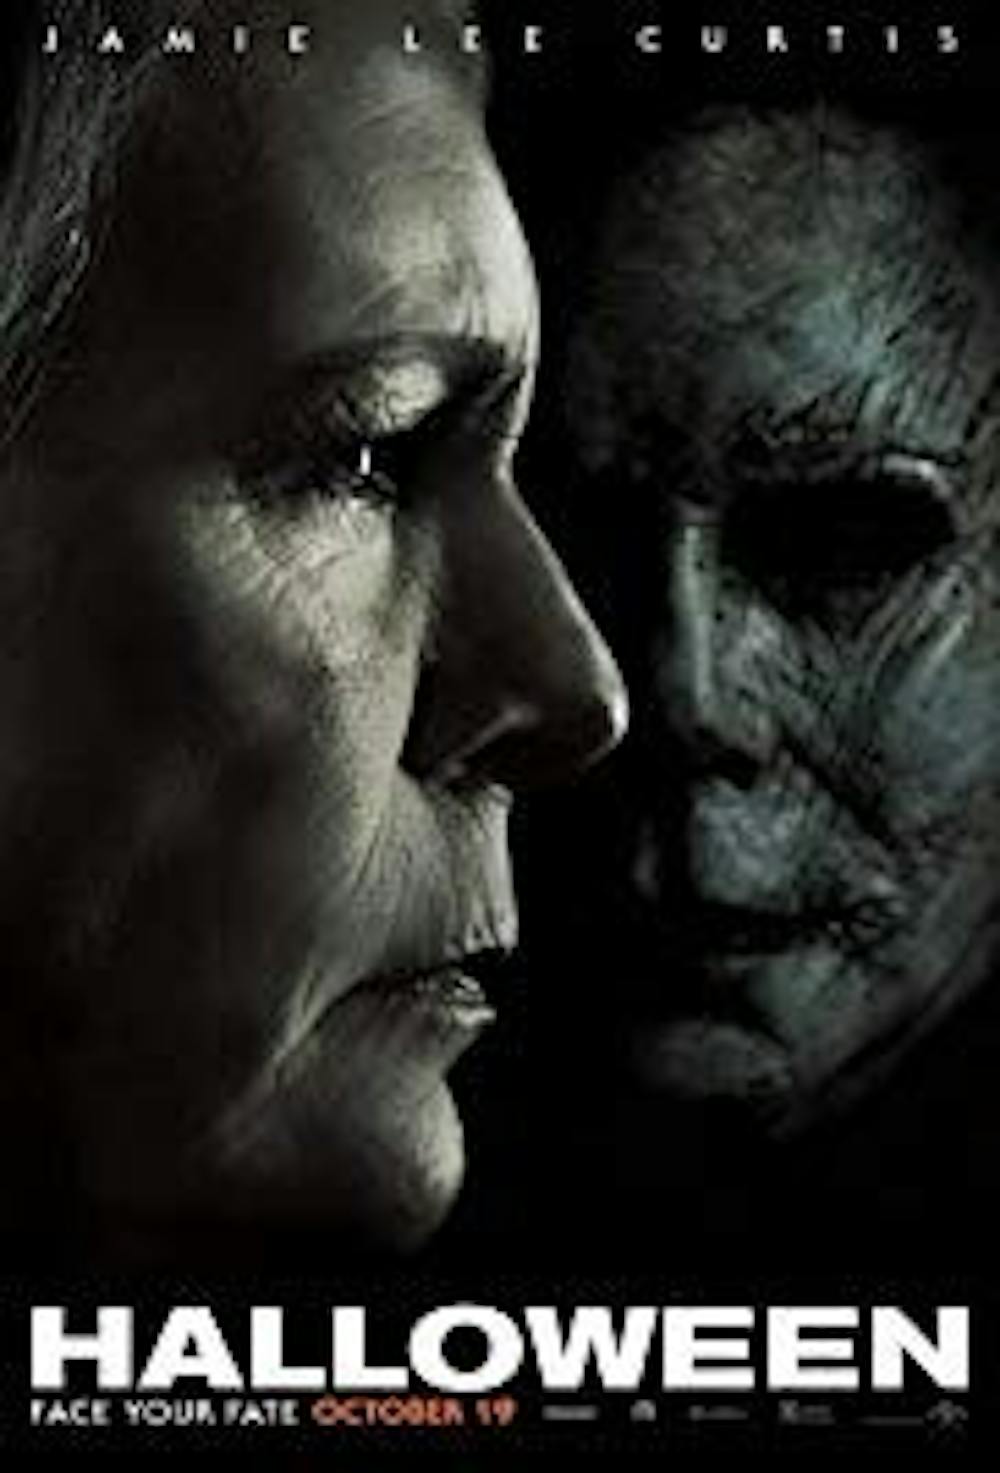 “Halloween” doesn’t rely solely on over-the-top gore to punctuate its terror in the minds of the audience; the viewer is left at the mercy of the filmmakers &mdash; much the same as the victims being terrorized on screen.